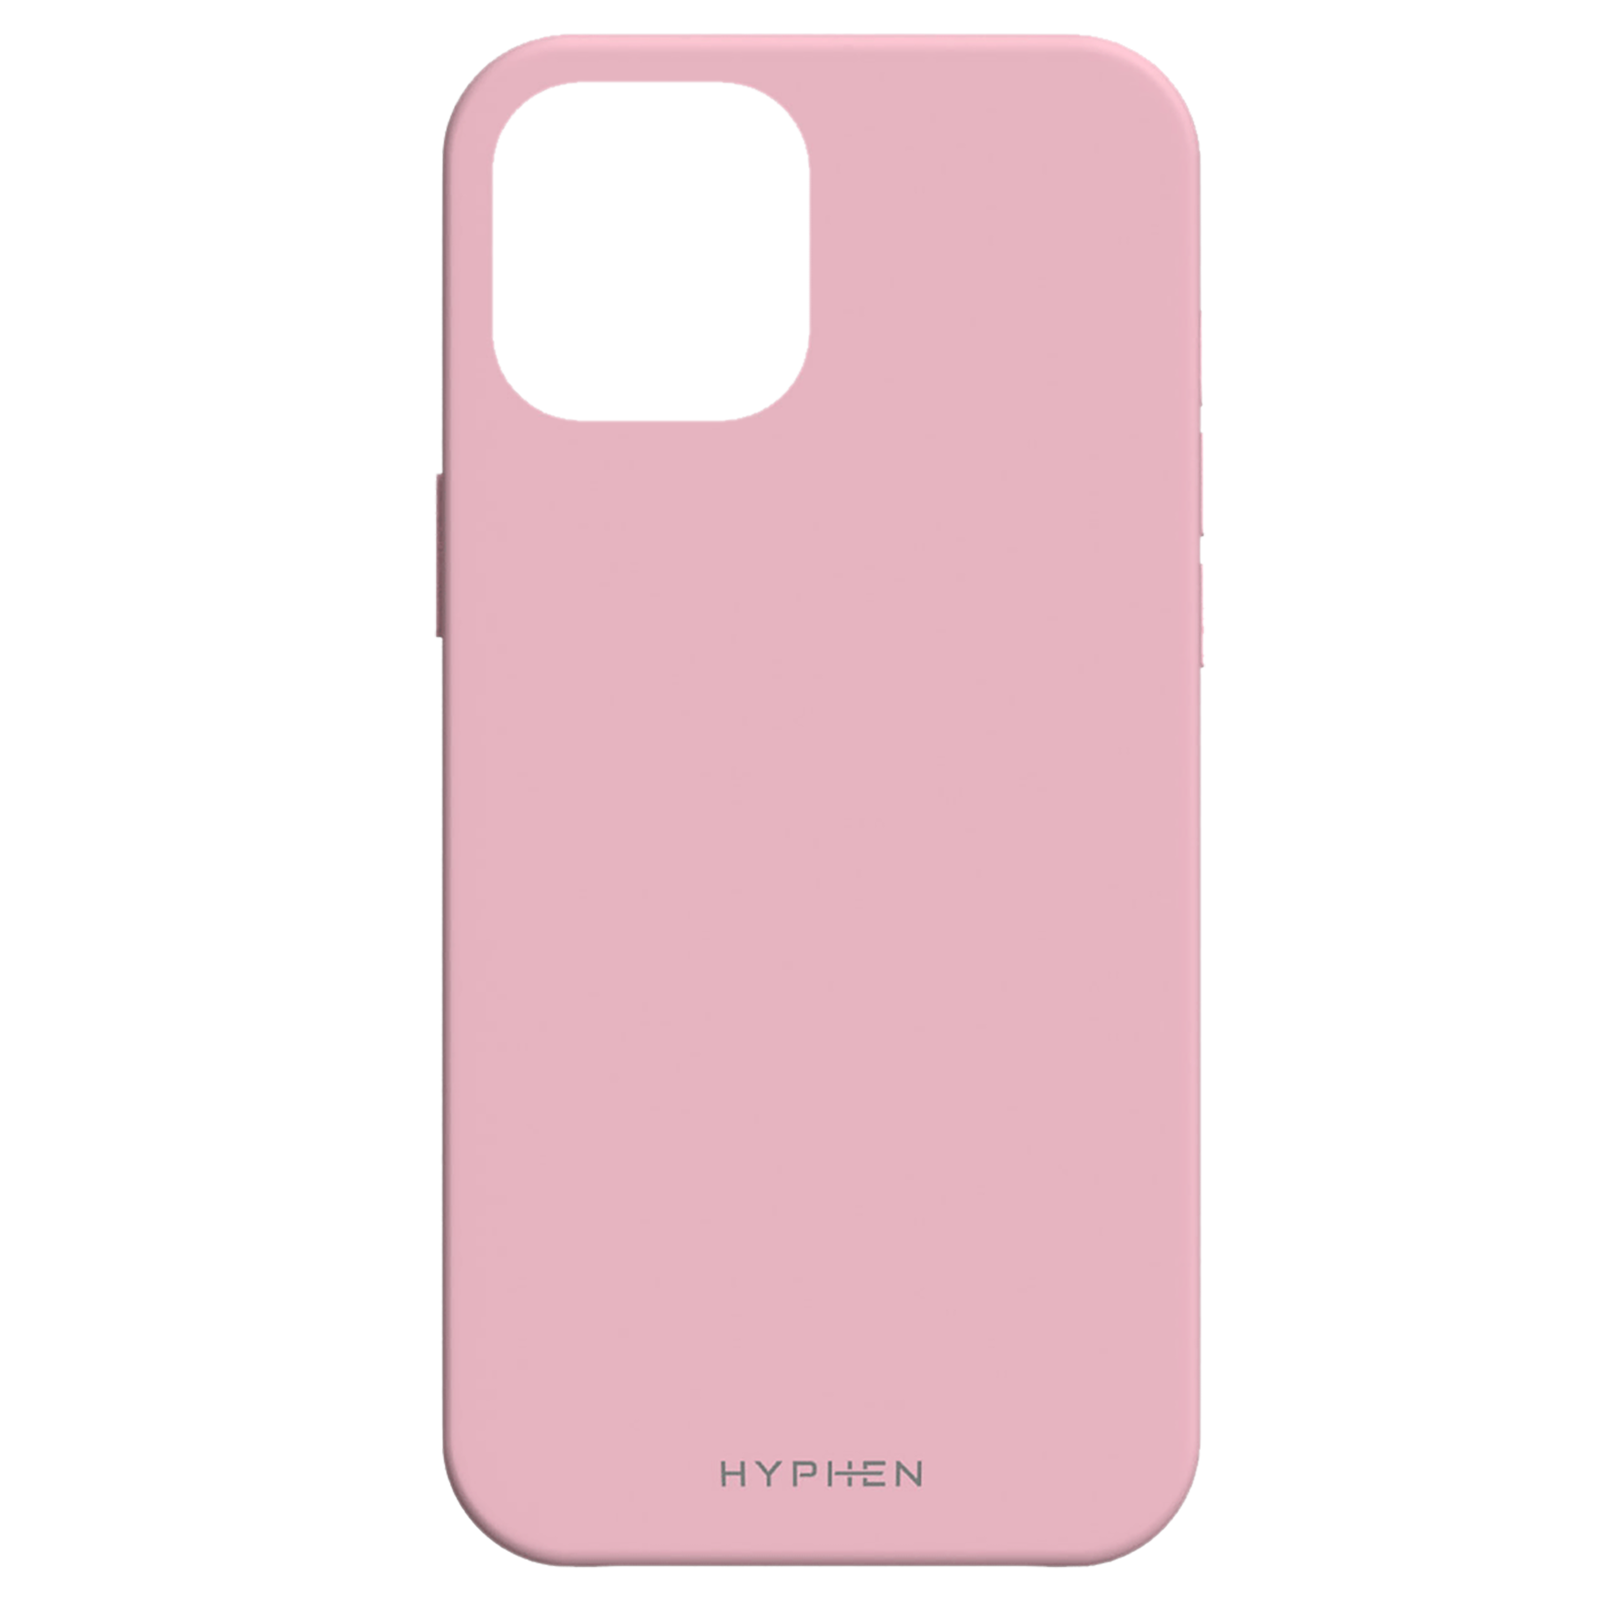 HYPHEN Tint Silicone Back Cover for Apple iPhone 12 Pro Max (Compact and Flexible, Pink)